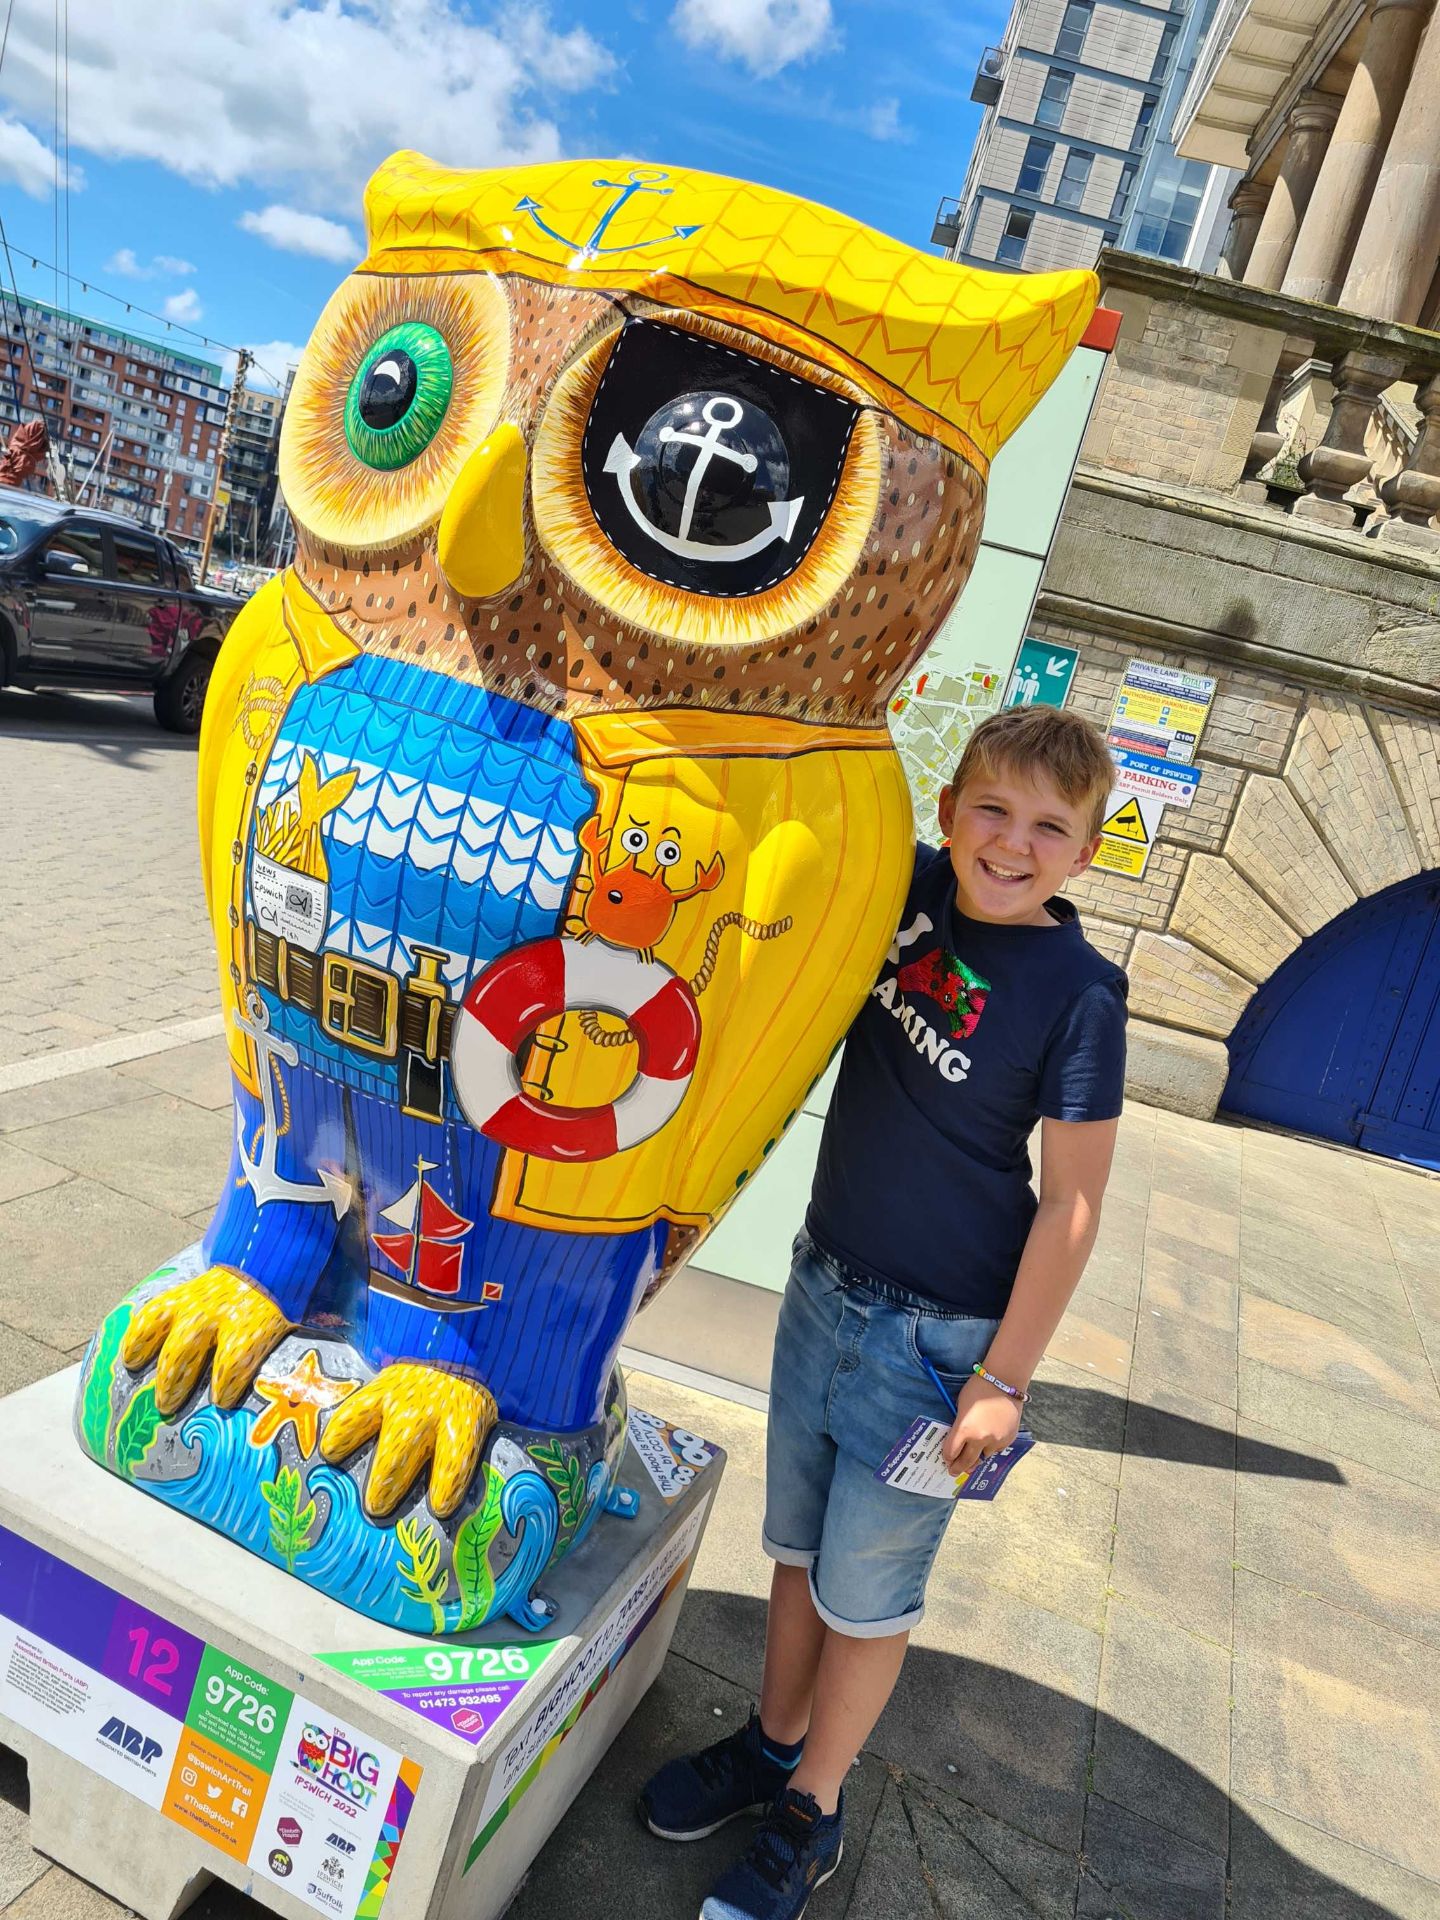 Ahoy by Phillipa & Rachael Corcutt. Sponsored by Associated British Ports (ABP). - Image 6 of 8